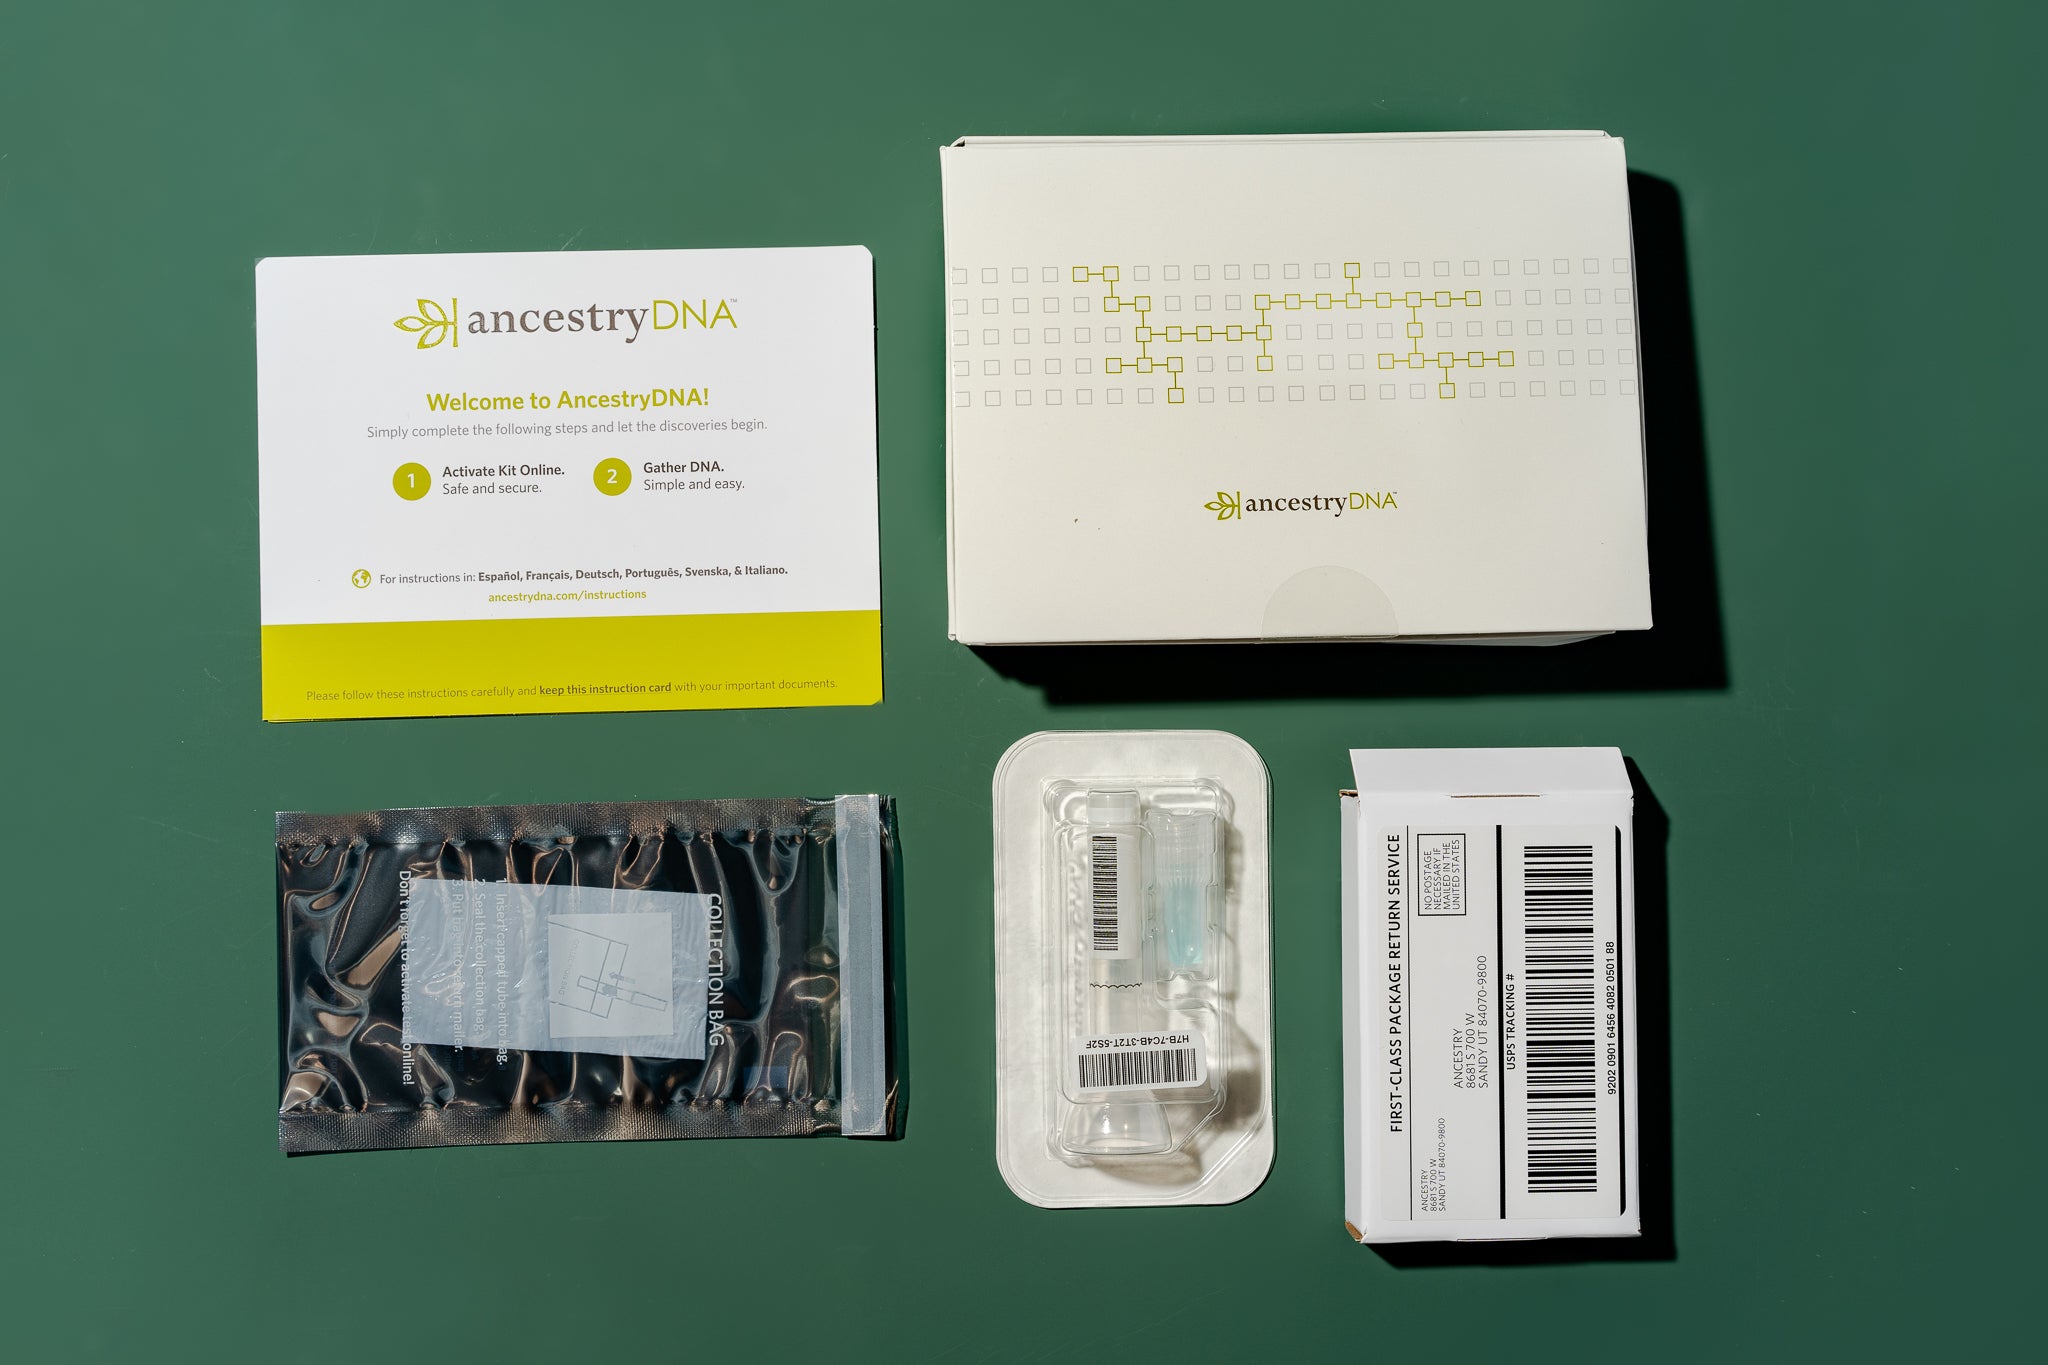 The Ancestry DNA kit shown unboxed, with all of its components.